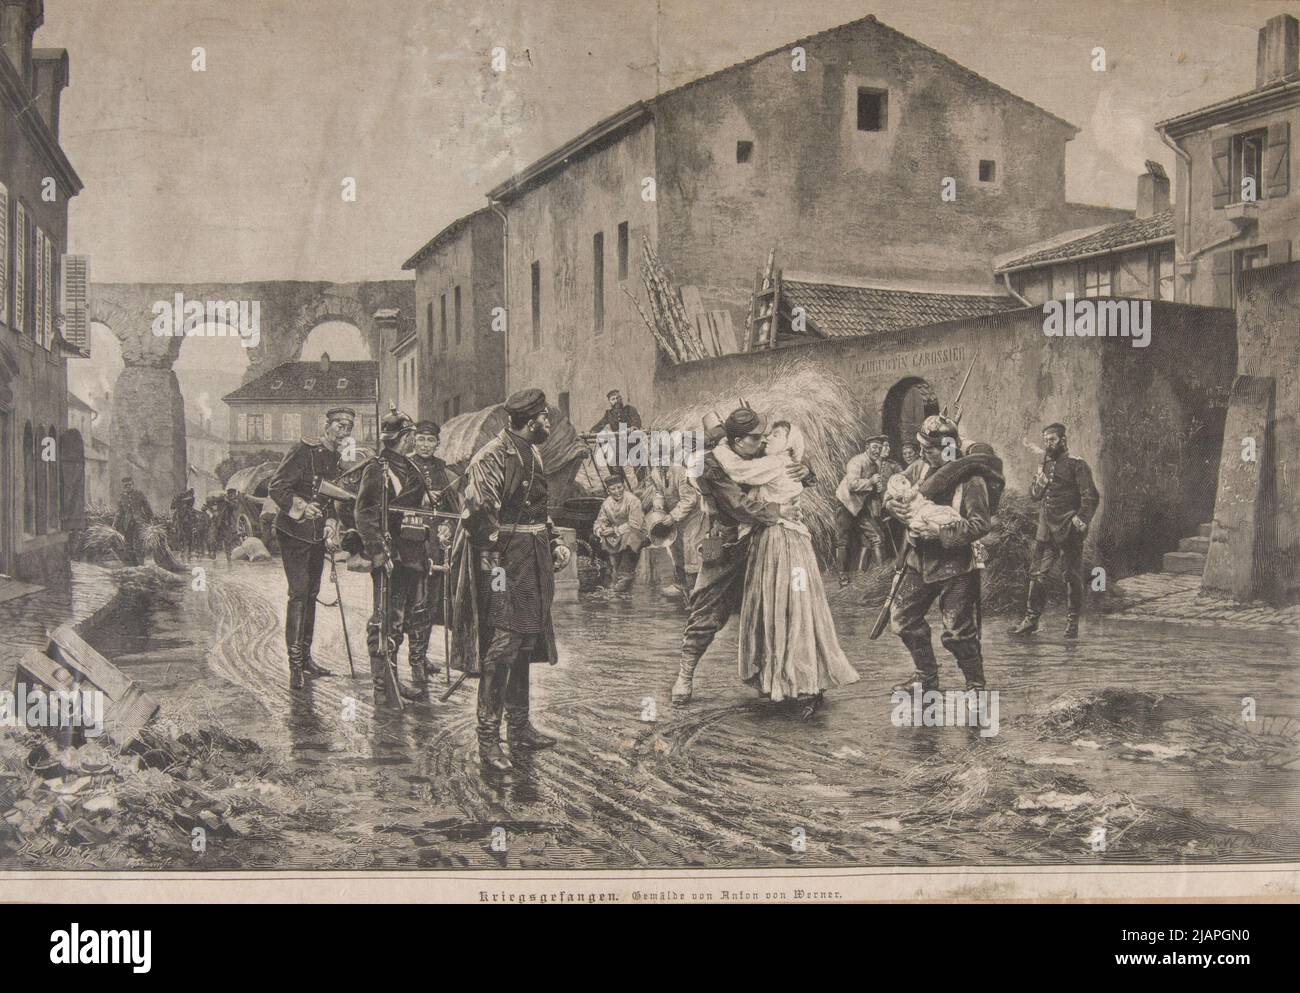 Episode from the French Prussian war 1870 71 according to the painting of Anton von Werner. A clip from a German magazine. Bong, Richard (1853 1935), Sommer, P. (N.N.), Werner, Anton von (1843 1915) Stock Photo